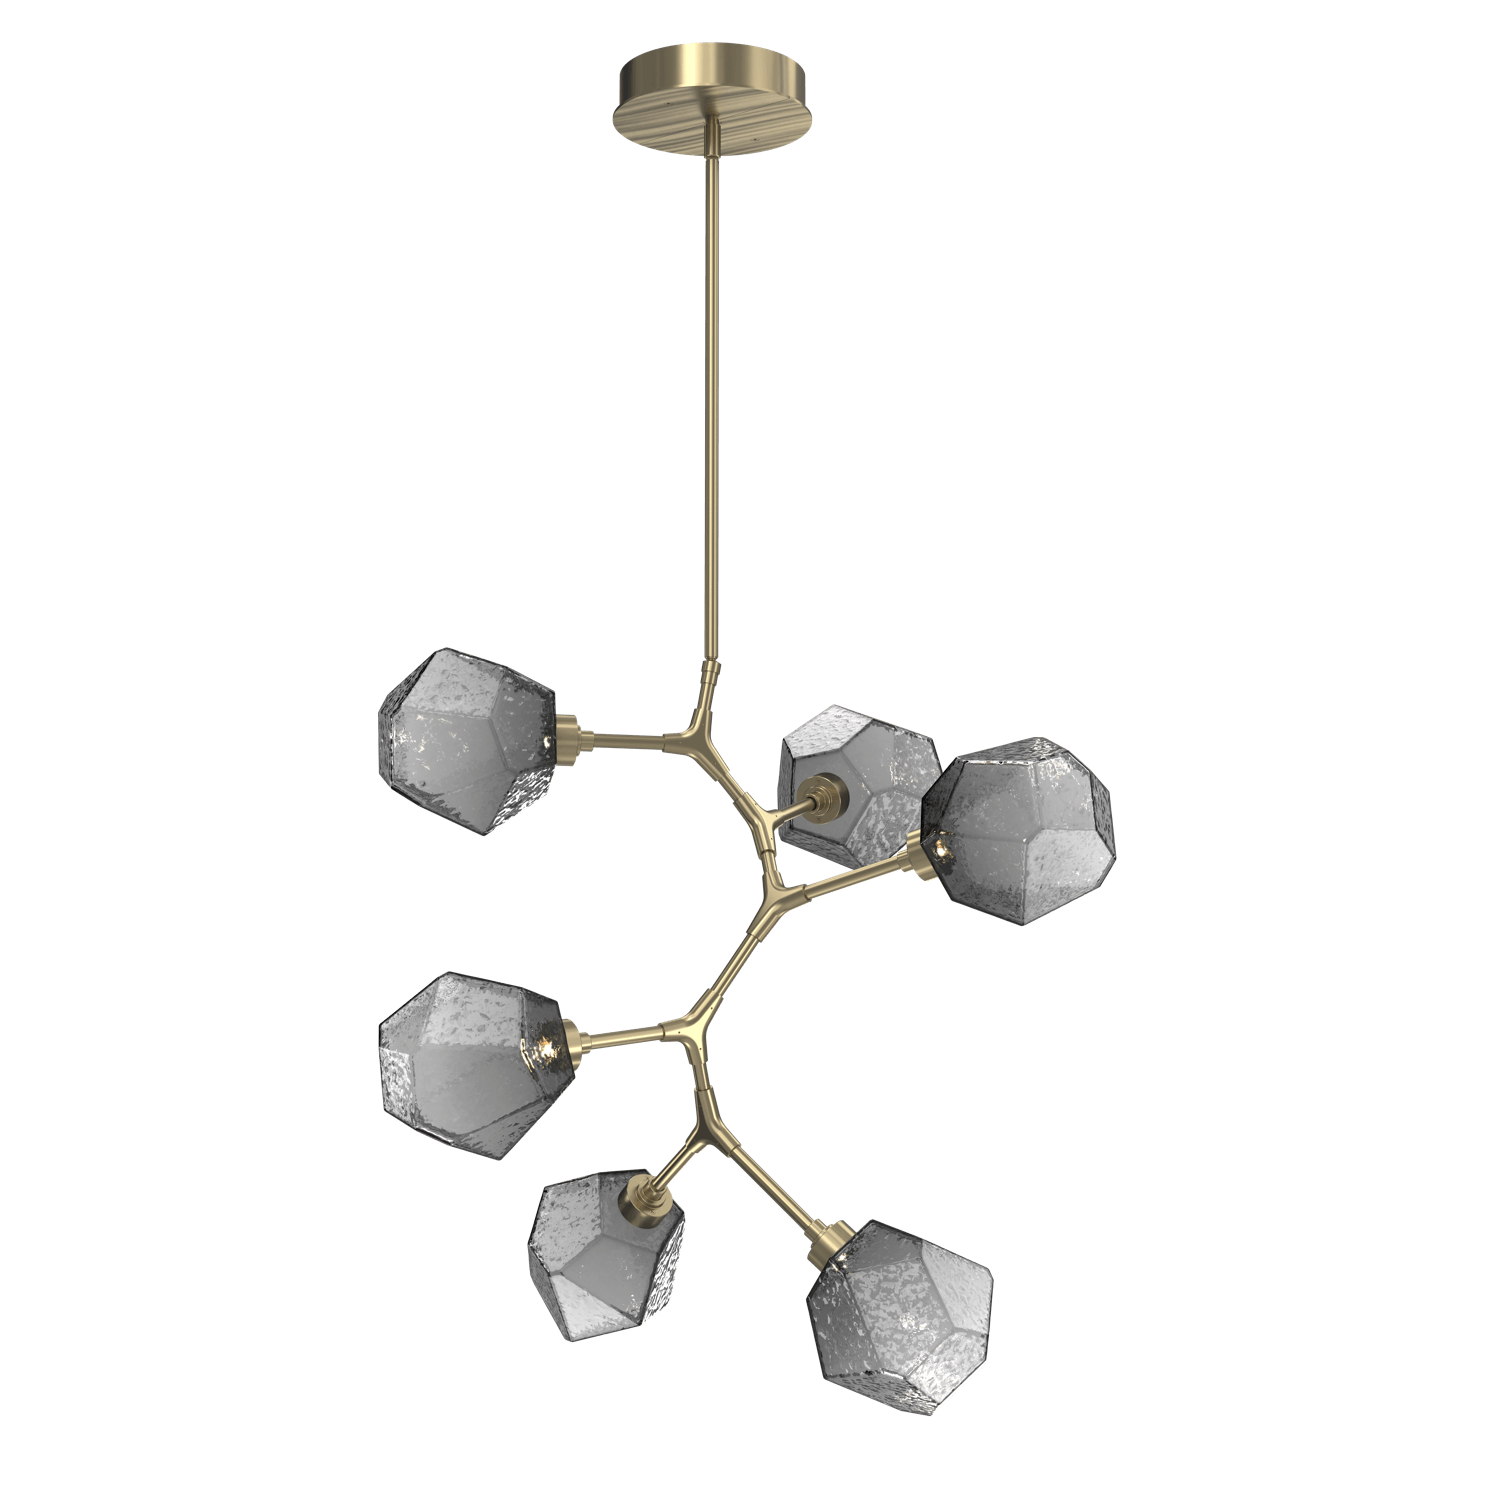 CHB0039-VA-HB-S-Hammerton-Studio-Gem-6-light-modern-vine-chandelier-with-heritage-brass-finish-and-smoke-blown-glass-shades-and-LED-lamping